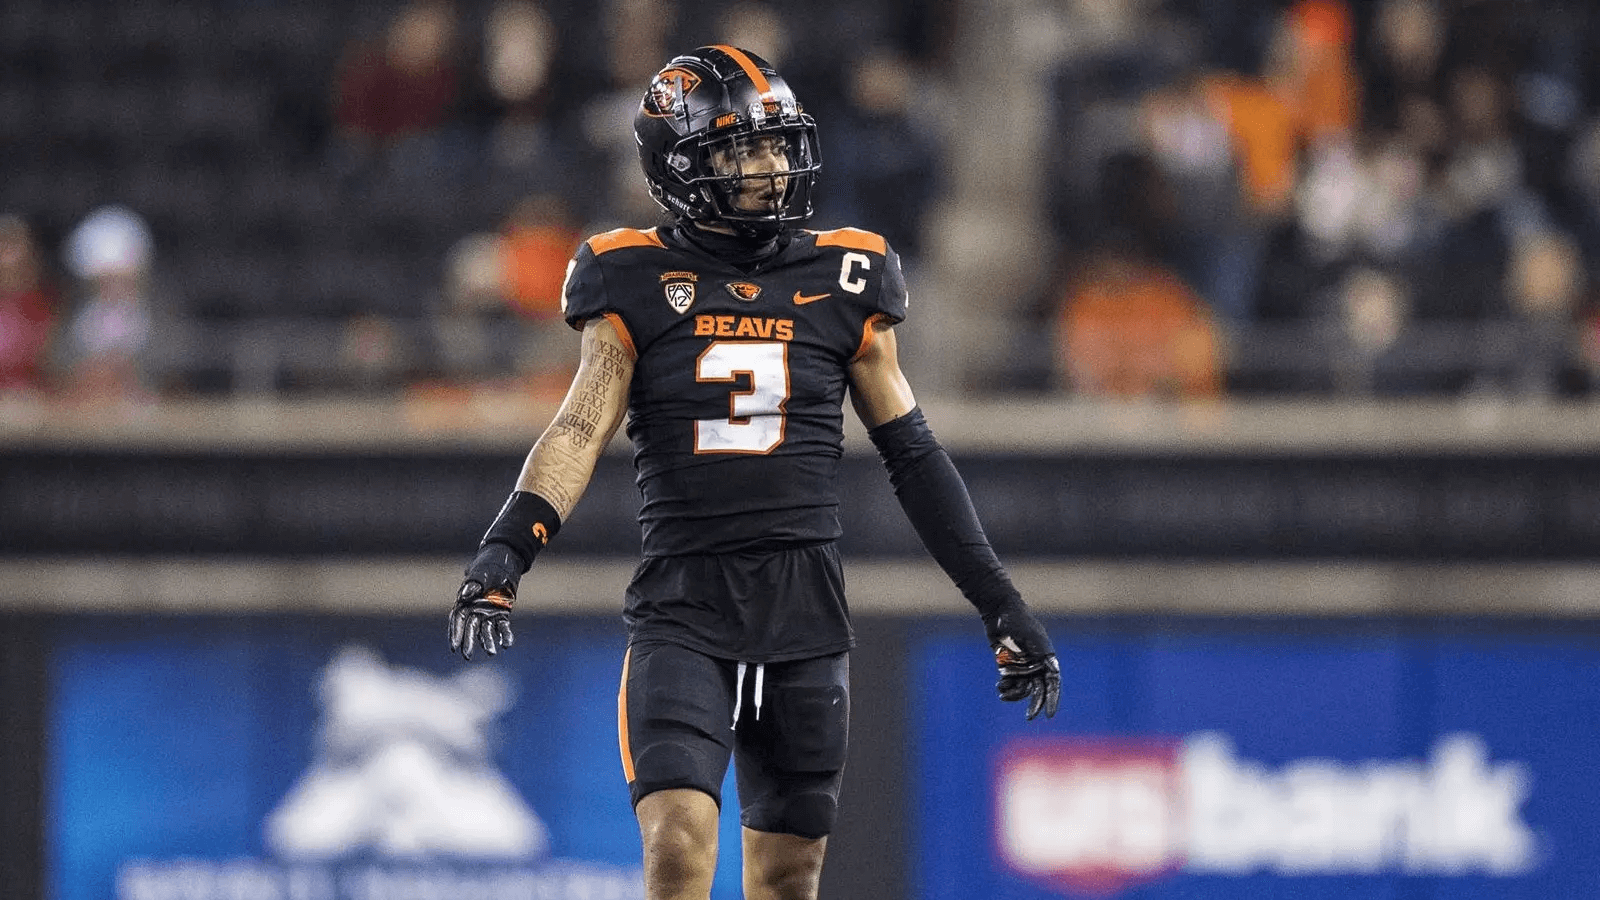 Oregon State football Beavers are turning up the pressure